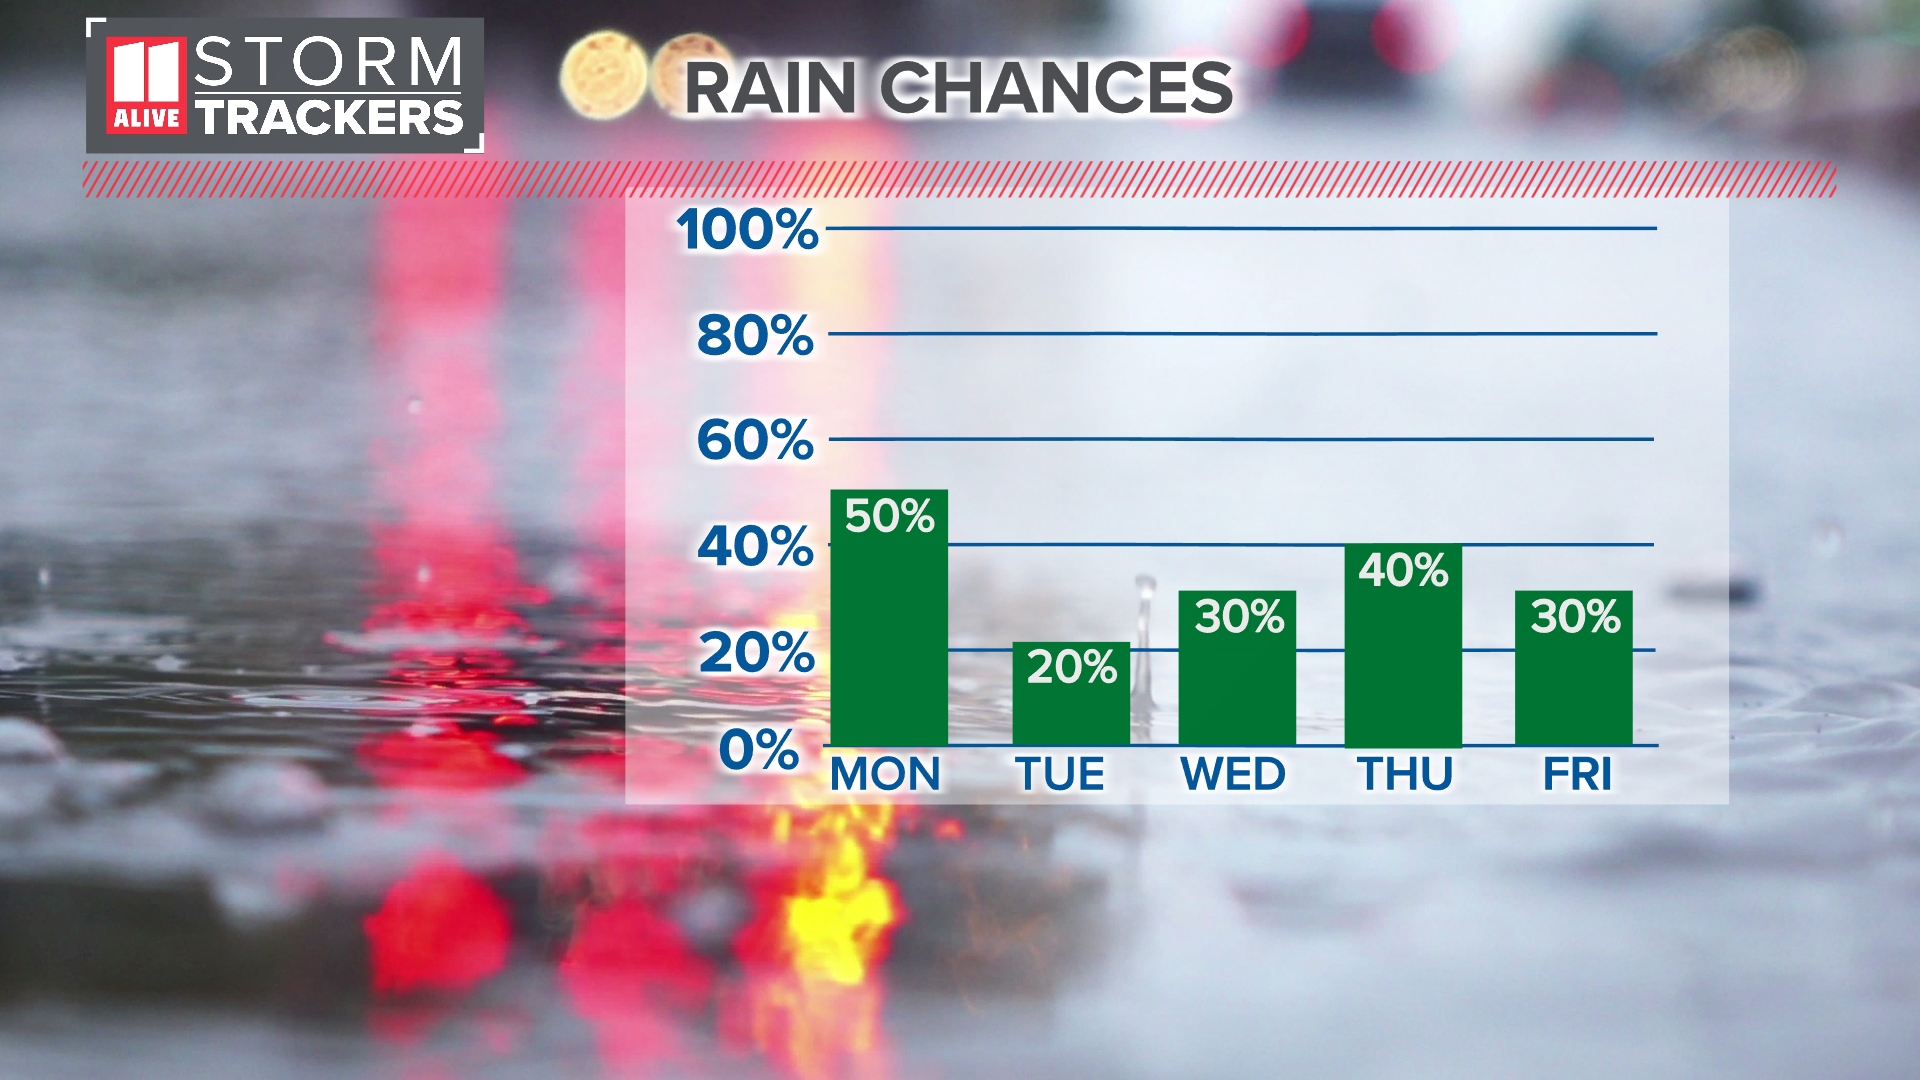 Up and down rain chances this week